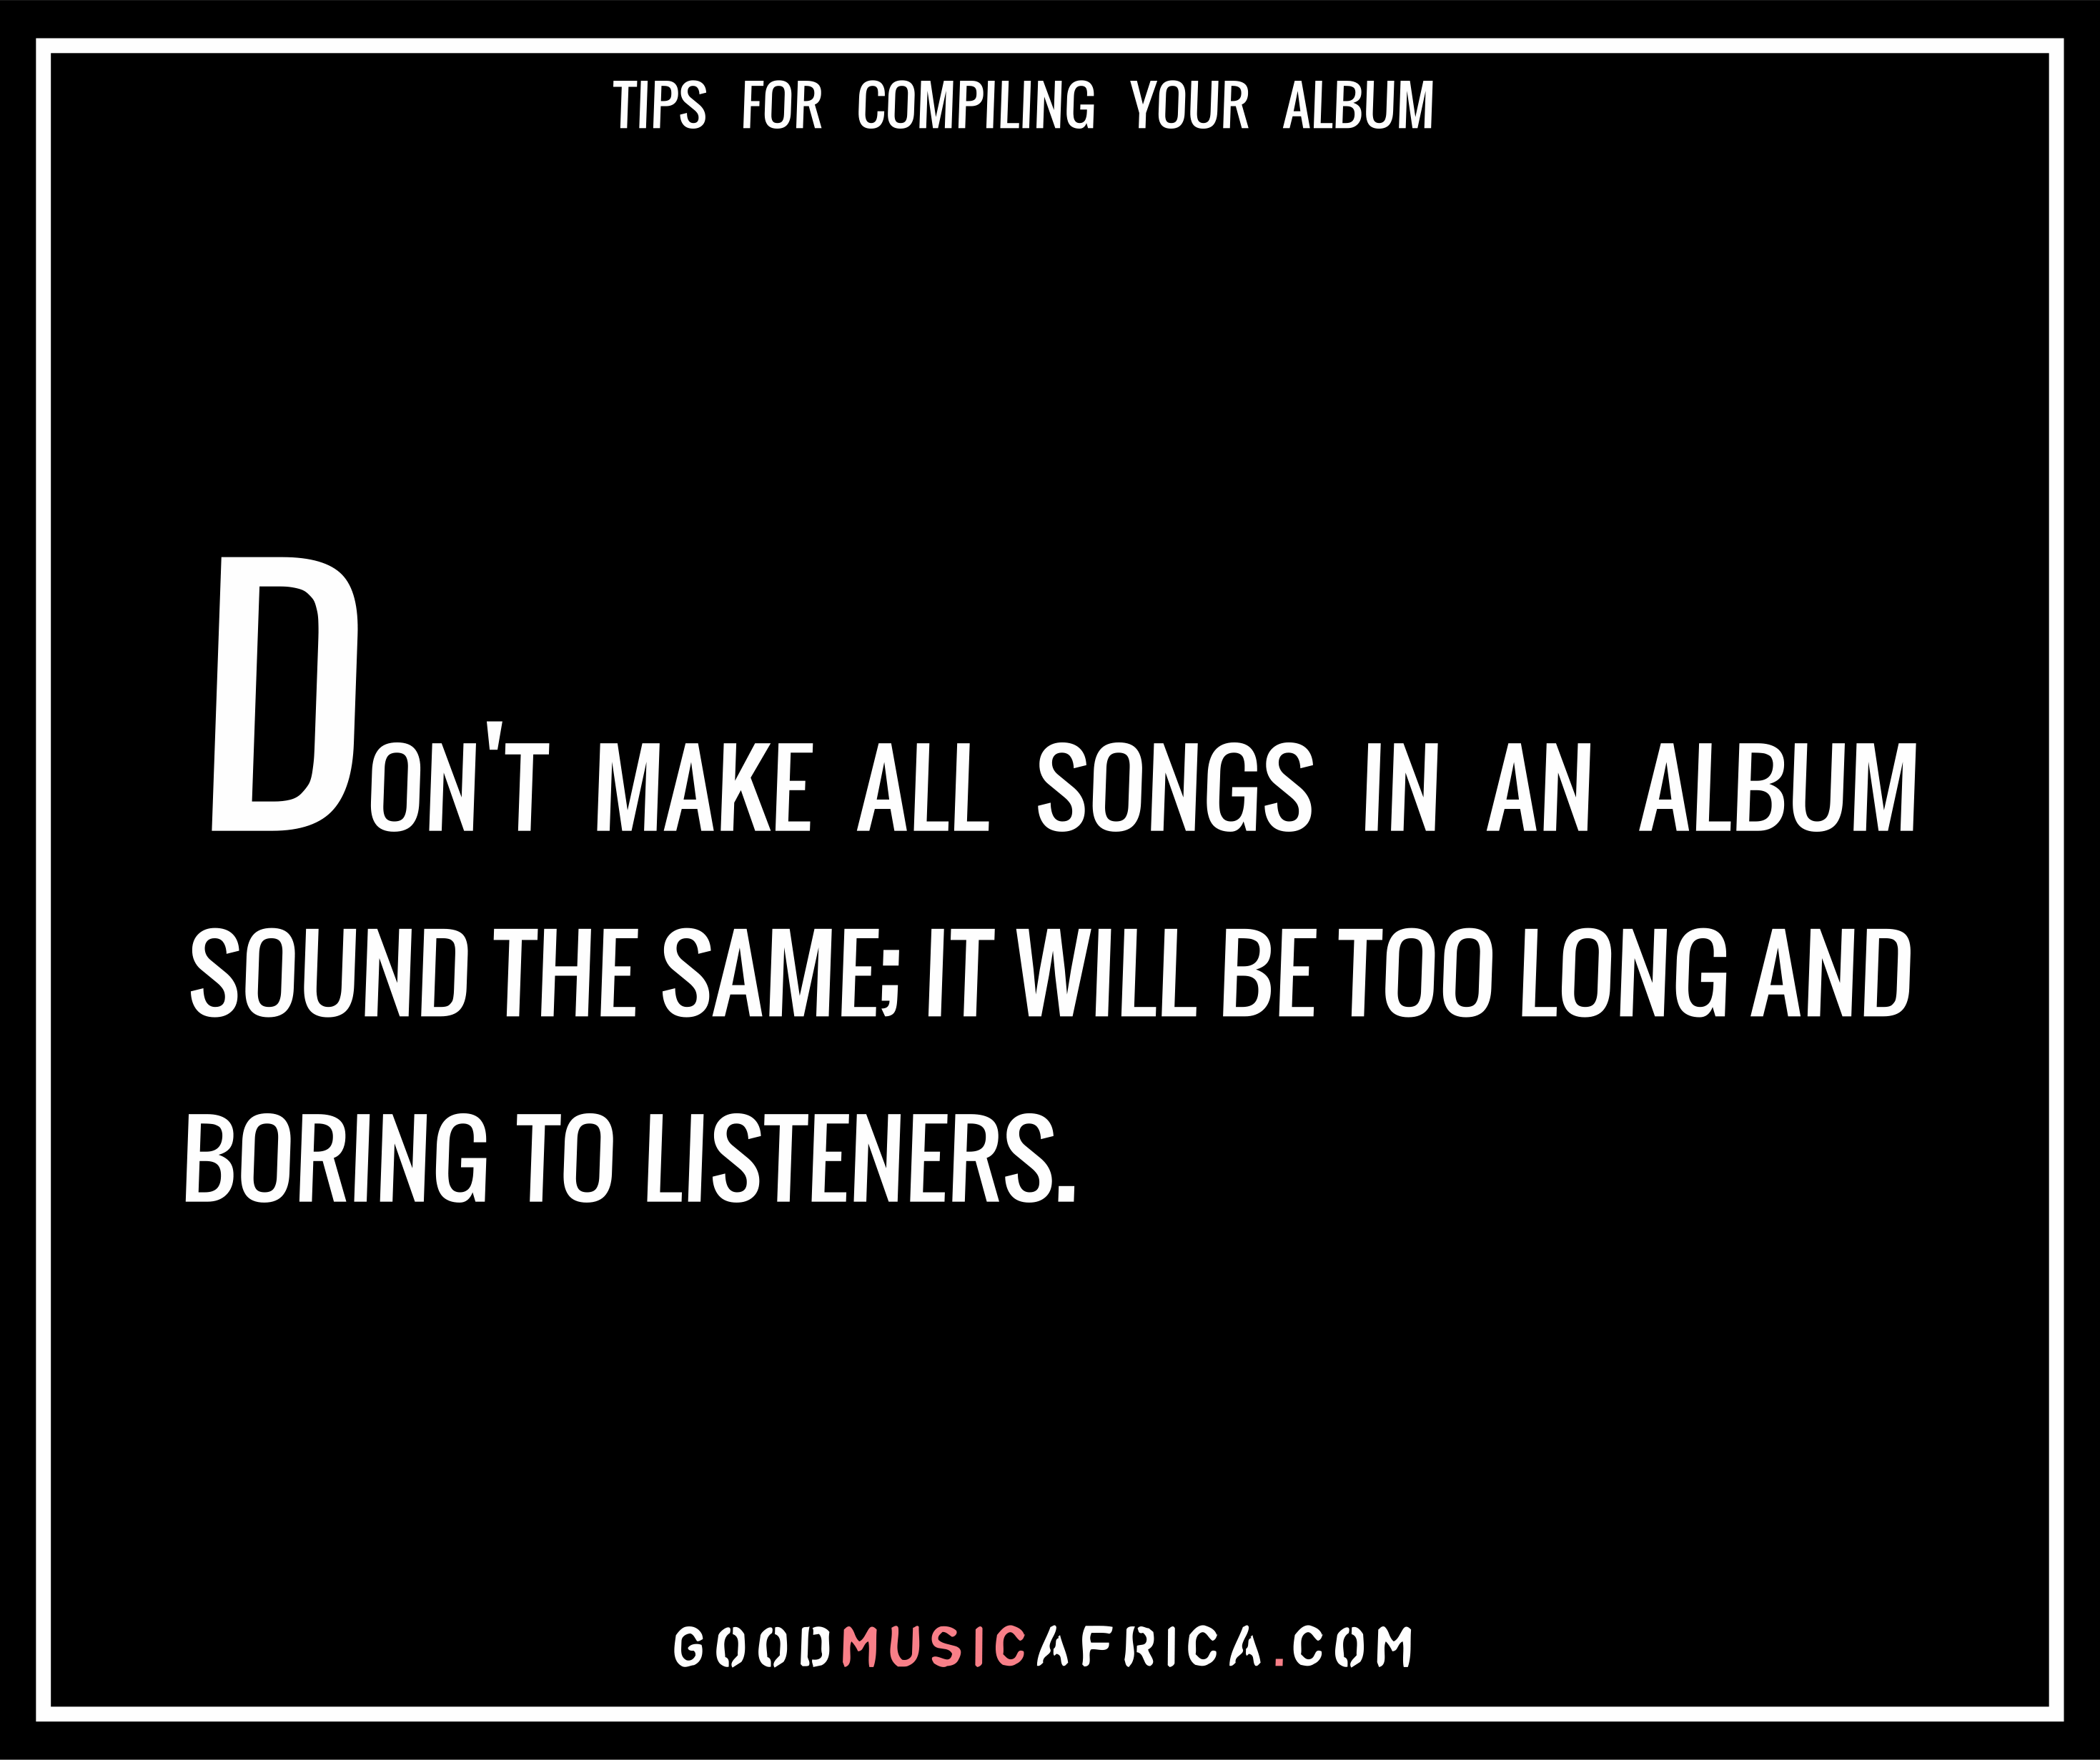 Best Tips for compiling an Album - Don't make all songs in an album sound the same; it will be too long and boring to listeners